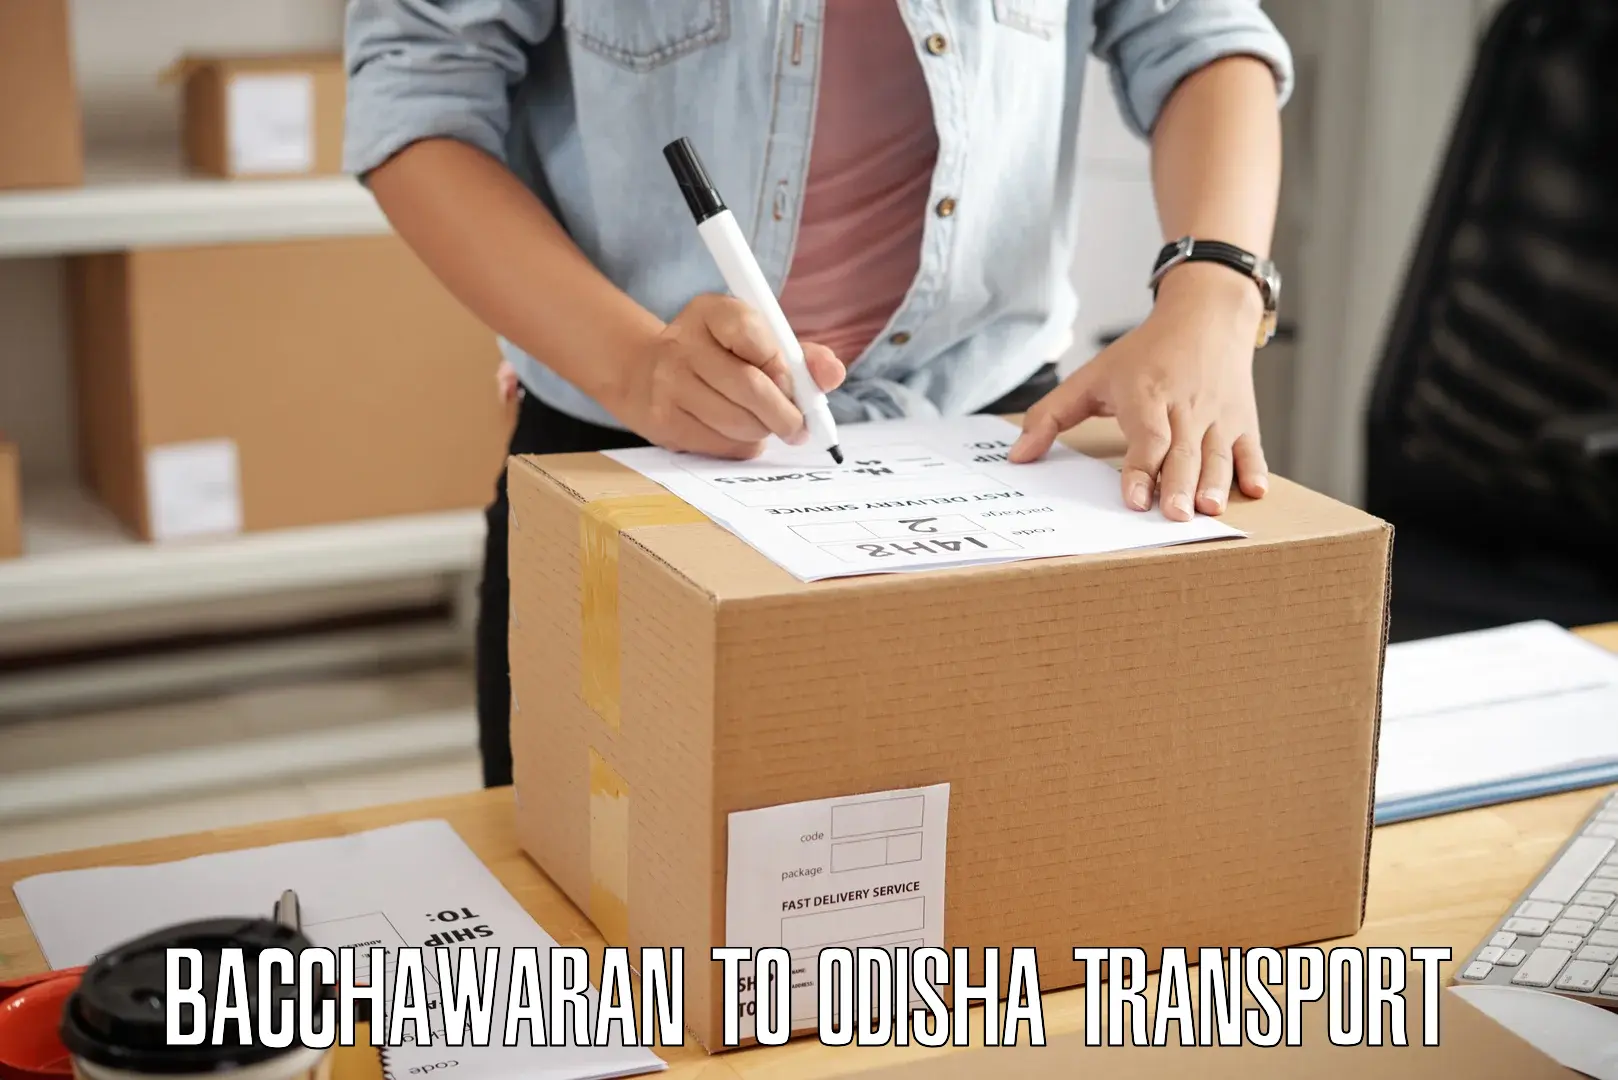 Two wheeler transport services in Bacchawaran to Odisha